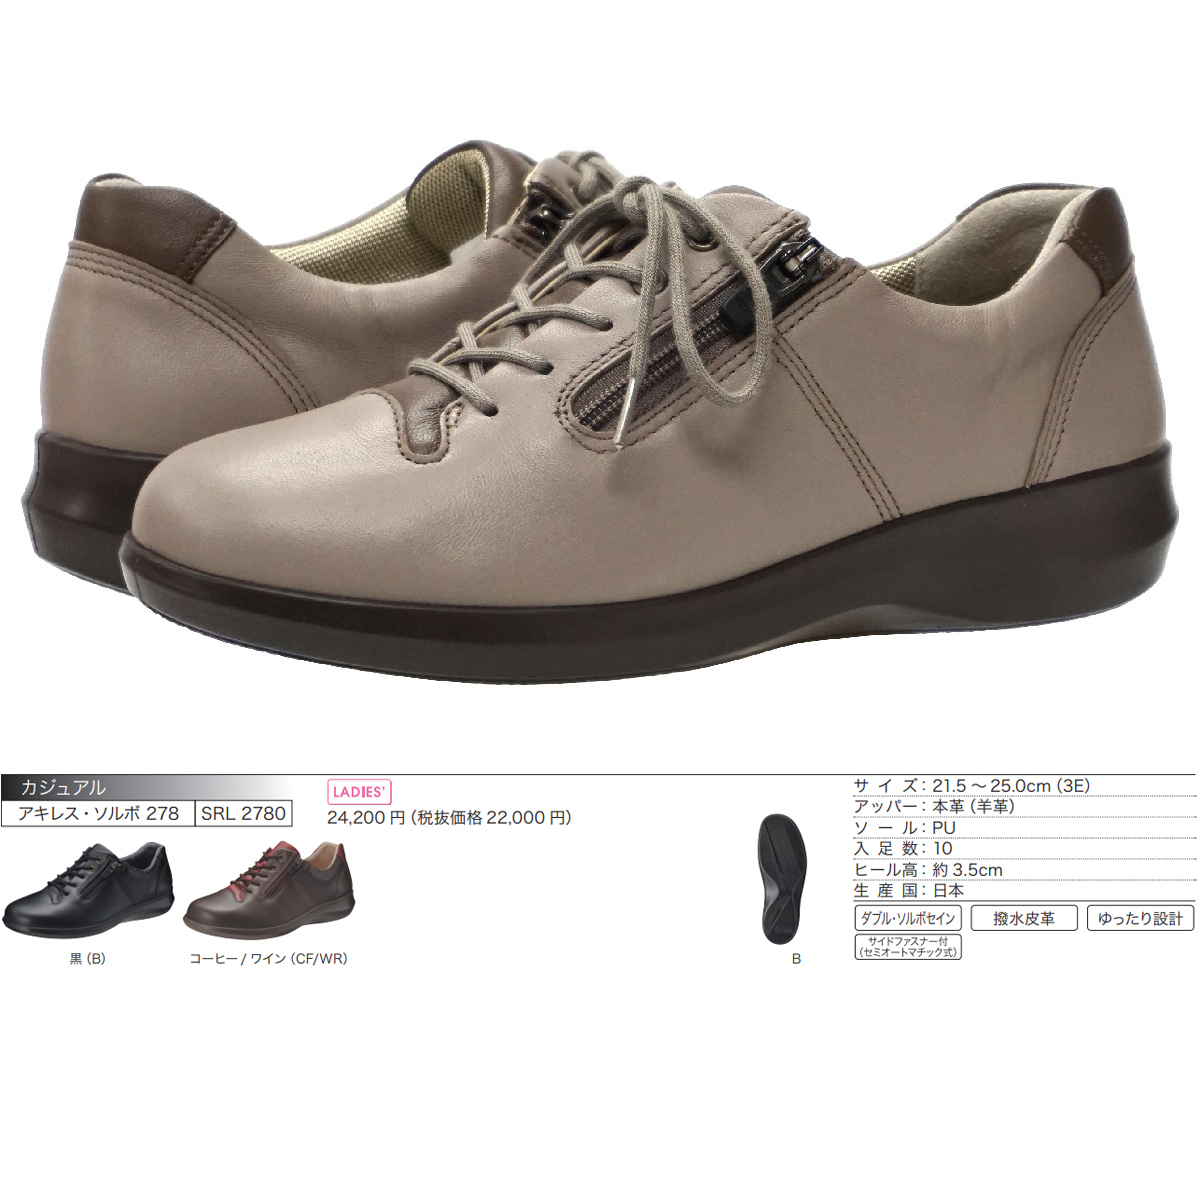 SRL2780 gray ju/ Stone 22.0cm Achilles sorubo lady's walking shoes shoes 3E Achilles SORBO woman original leather sheep leather made in Japan 